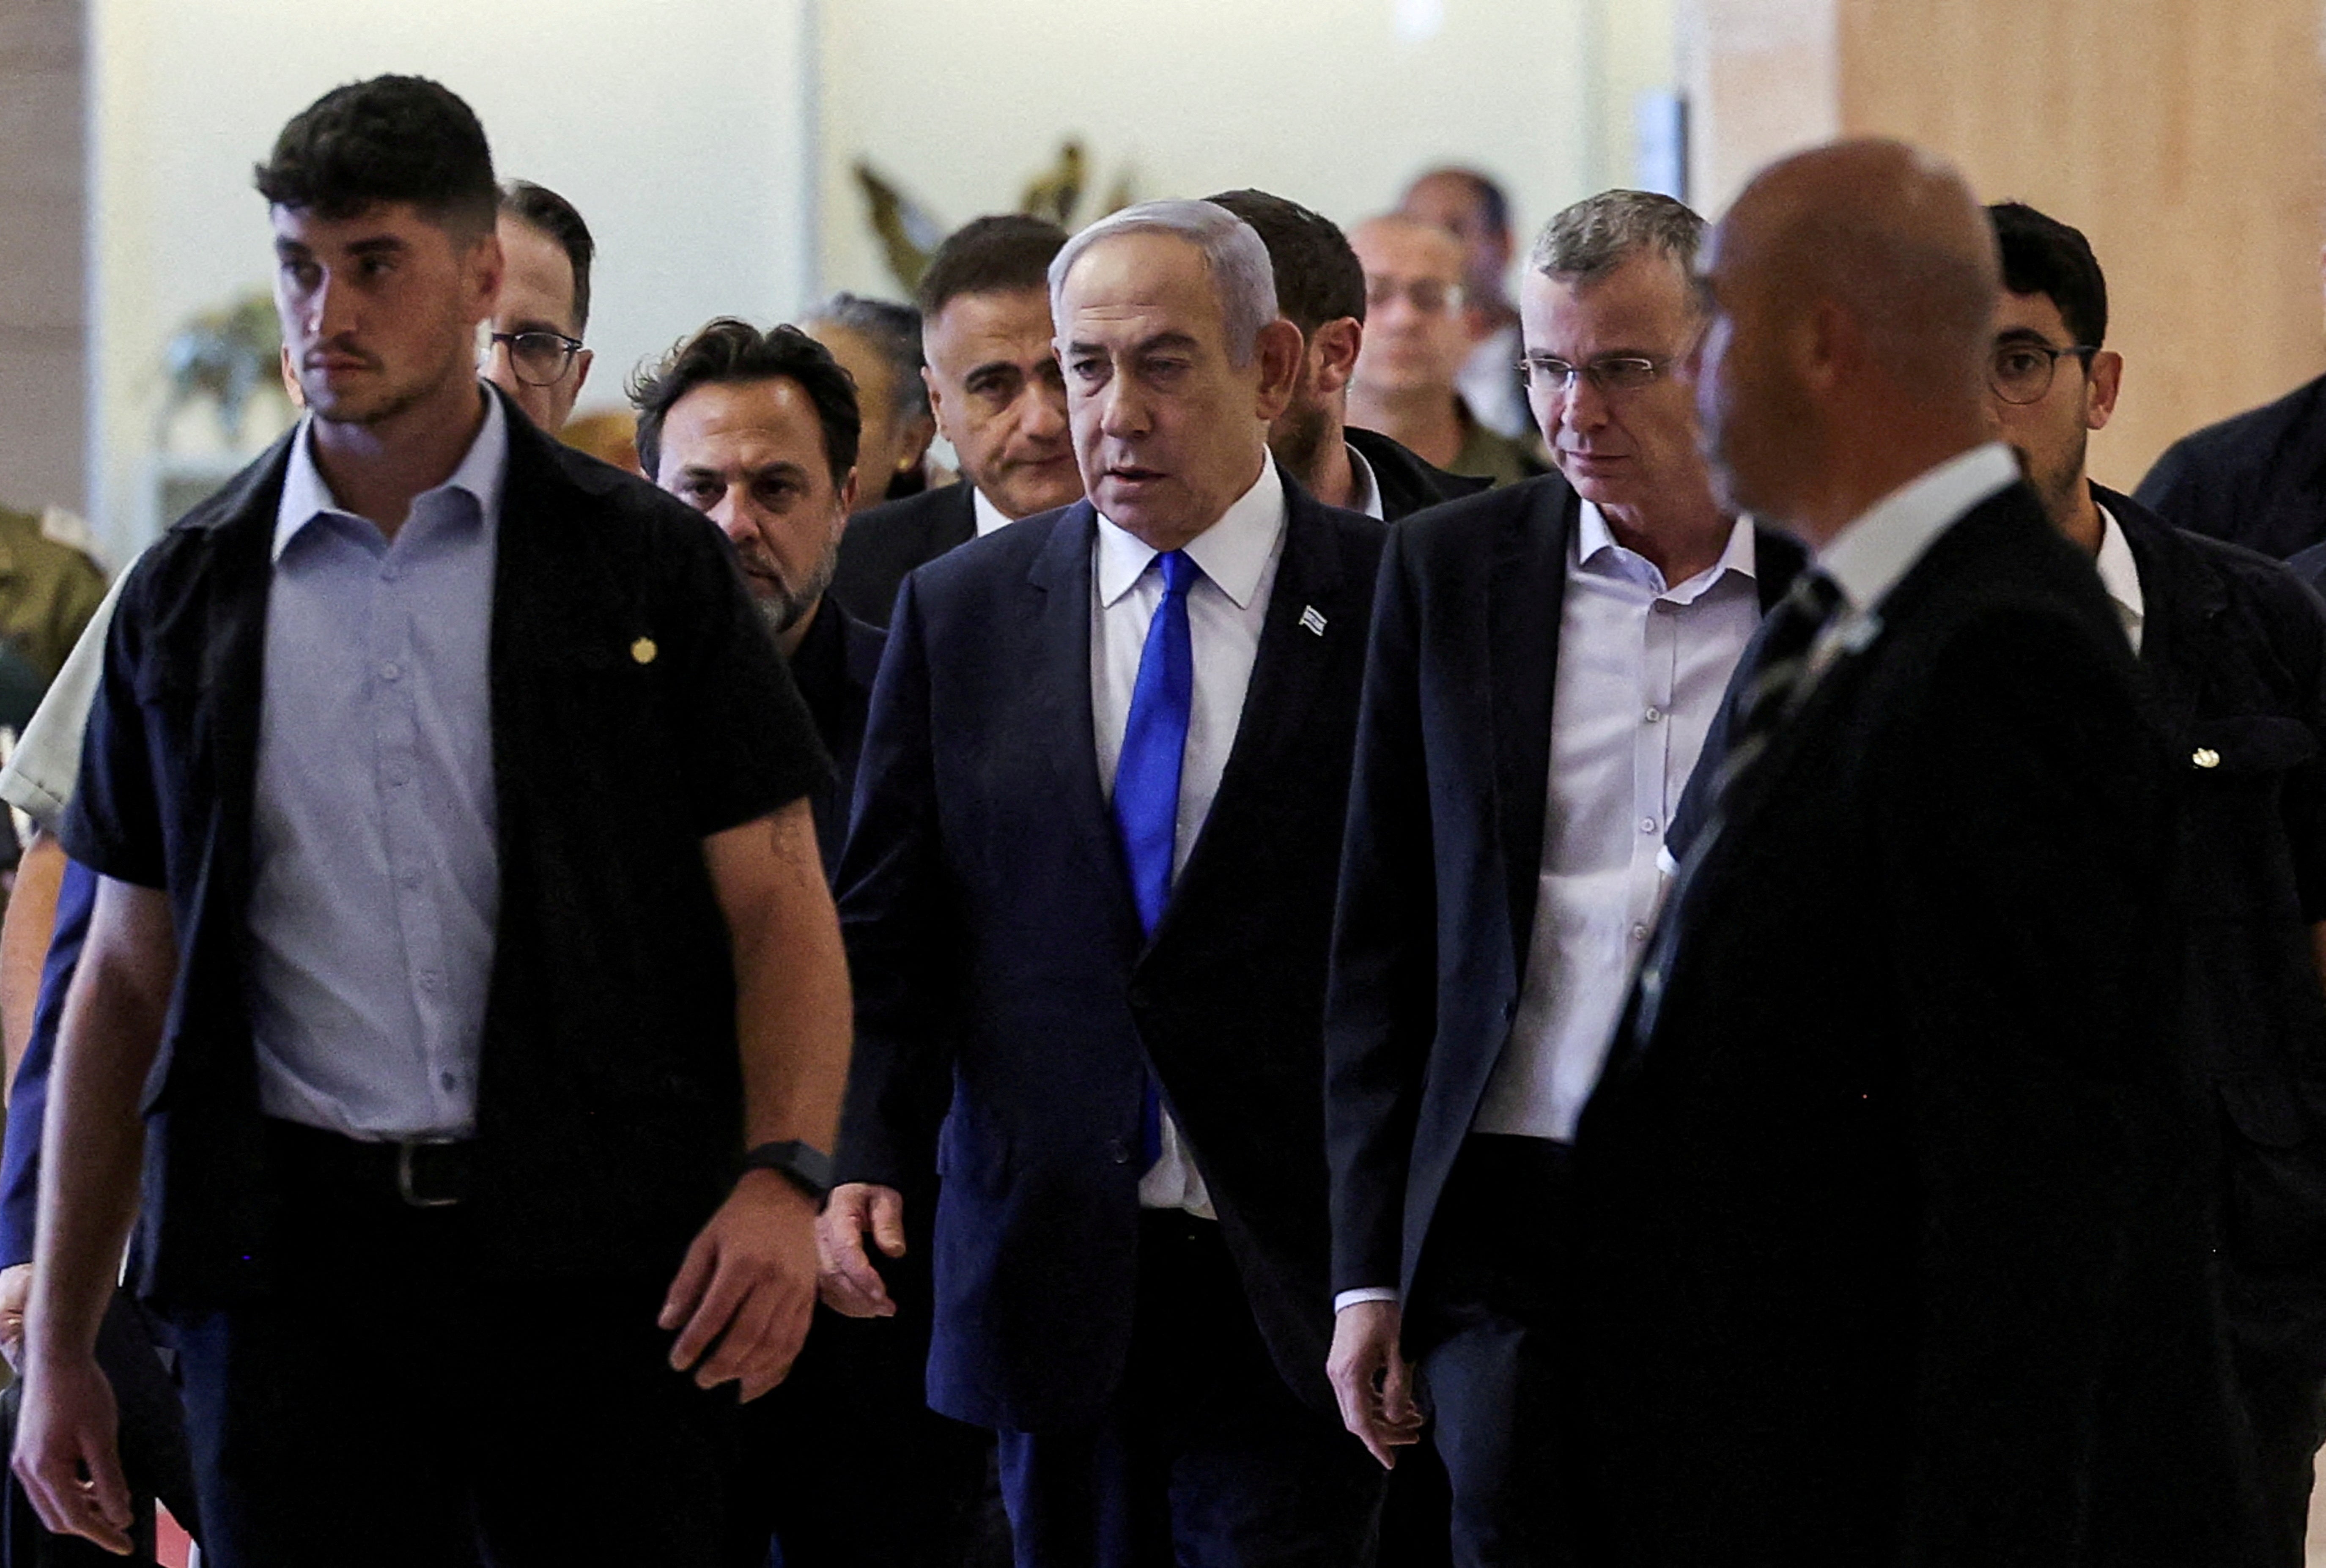 Netanyahu has expressed serious doubts about the new ceasefire plan